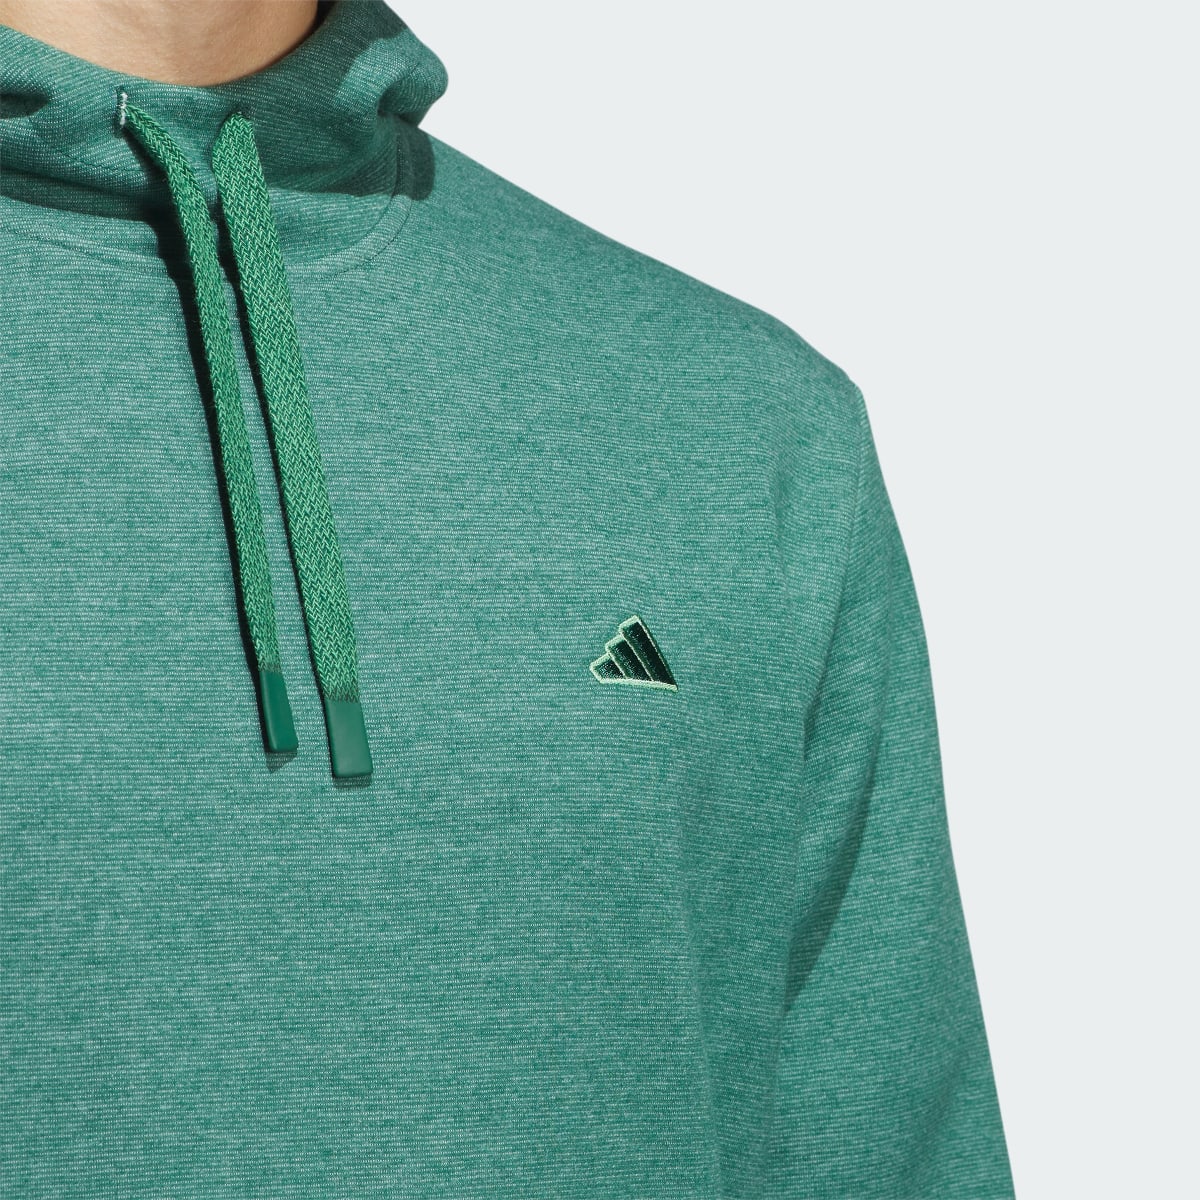 Adidas Go-To Hoodie. 6